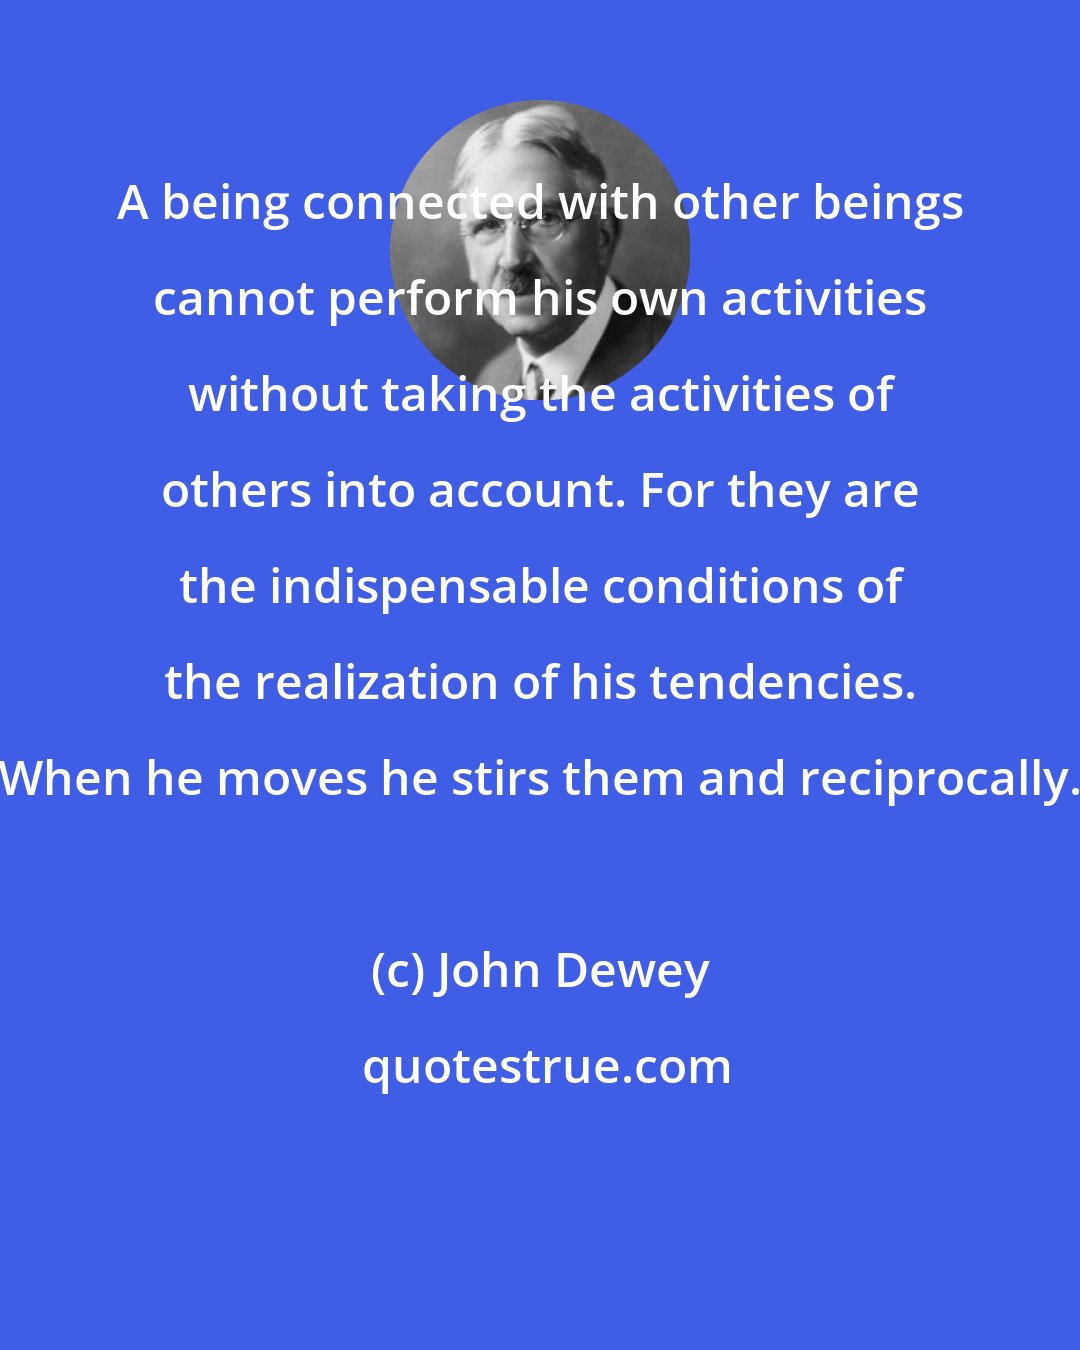 John Dewey: A being connected with other beings cannot perform his own activities without taking the activities of others into account. For they are the indispensable conditions of the realization of his tendencies. When he moves he stirs them and reciprocally.